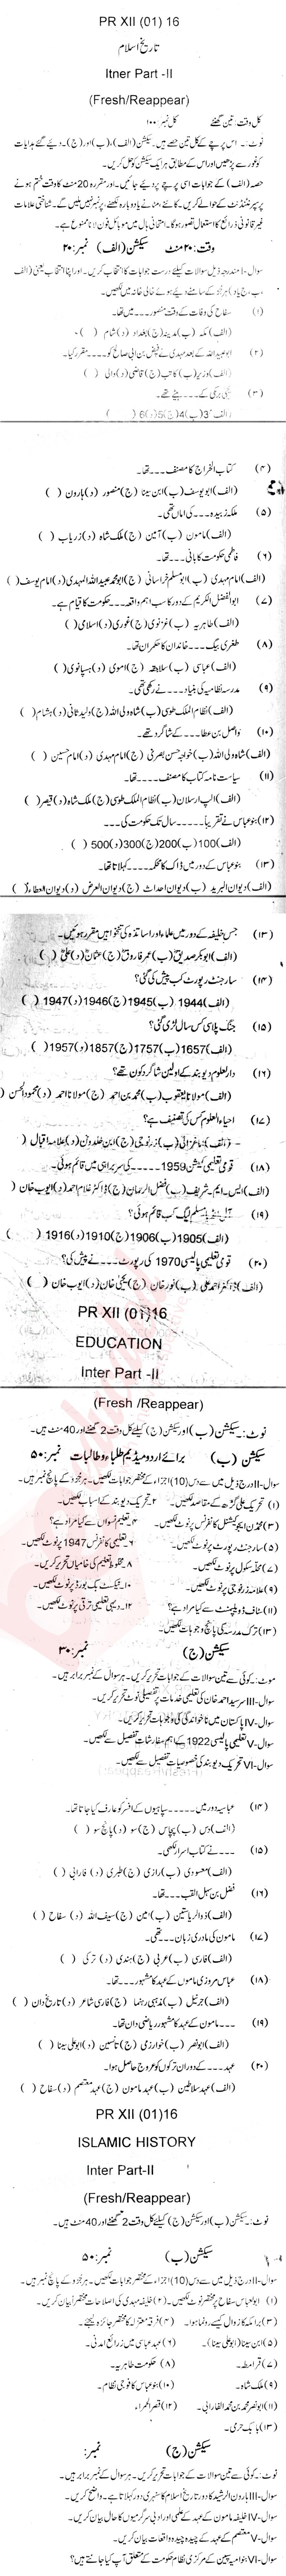 Islamic History FA Part 2 Past Paper Group 1 BISE Swat 2016